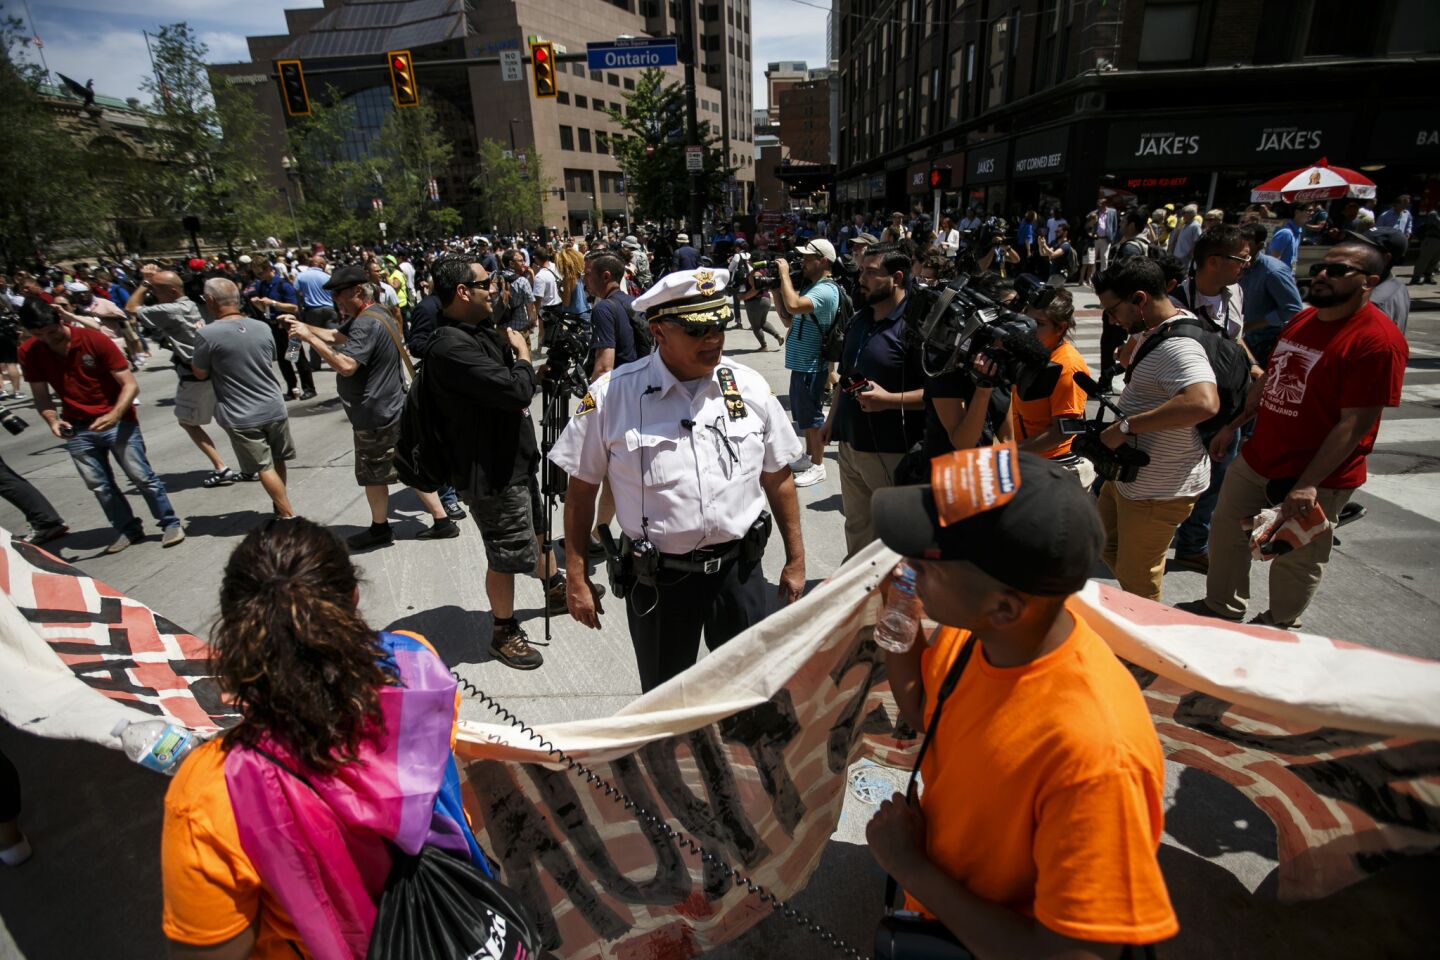 Republican National Convention protests